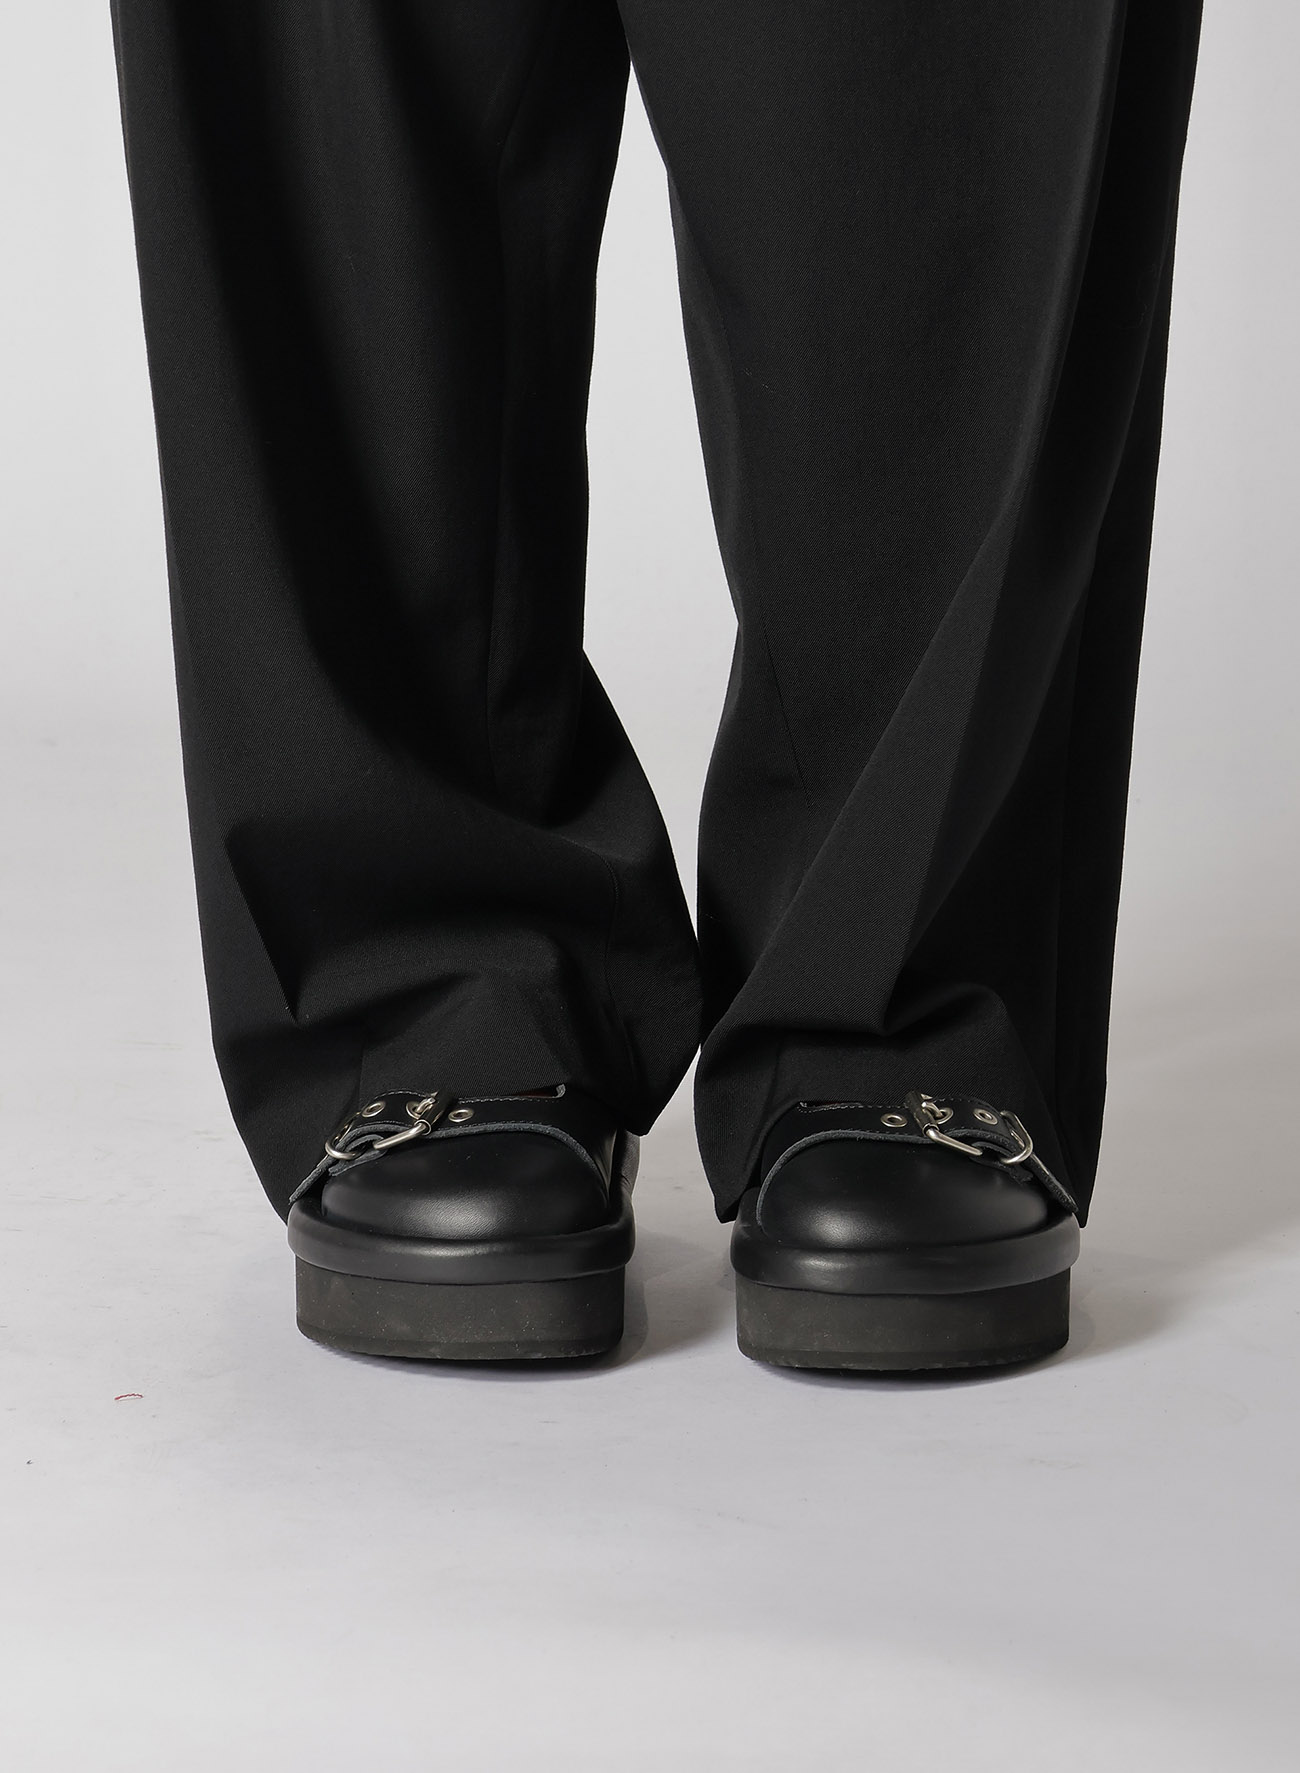 【7/17 12:00(JST) Release】HIGH TWISTED WASHER WOOL GABARDINE SAROUEL PANTS